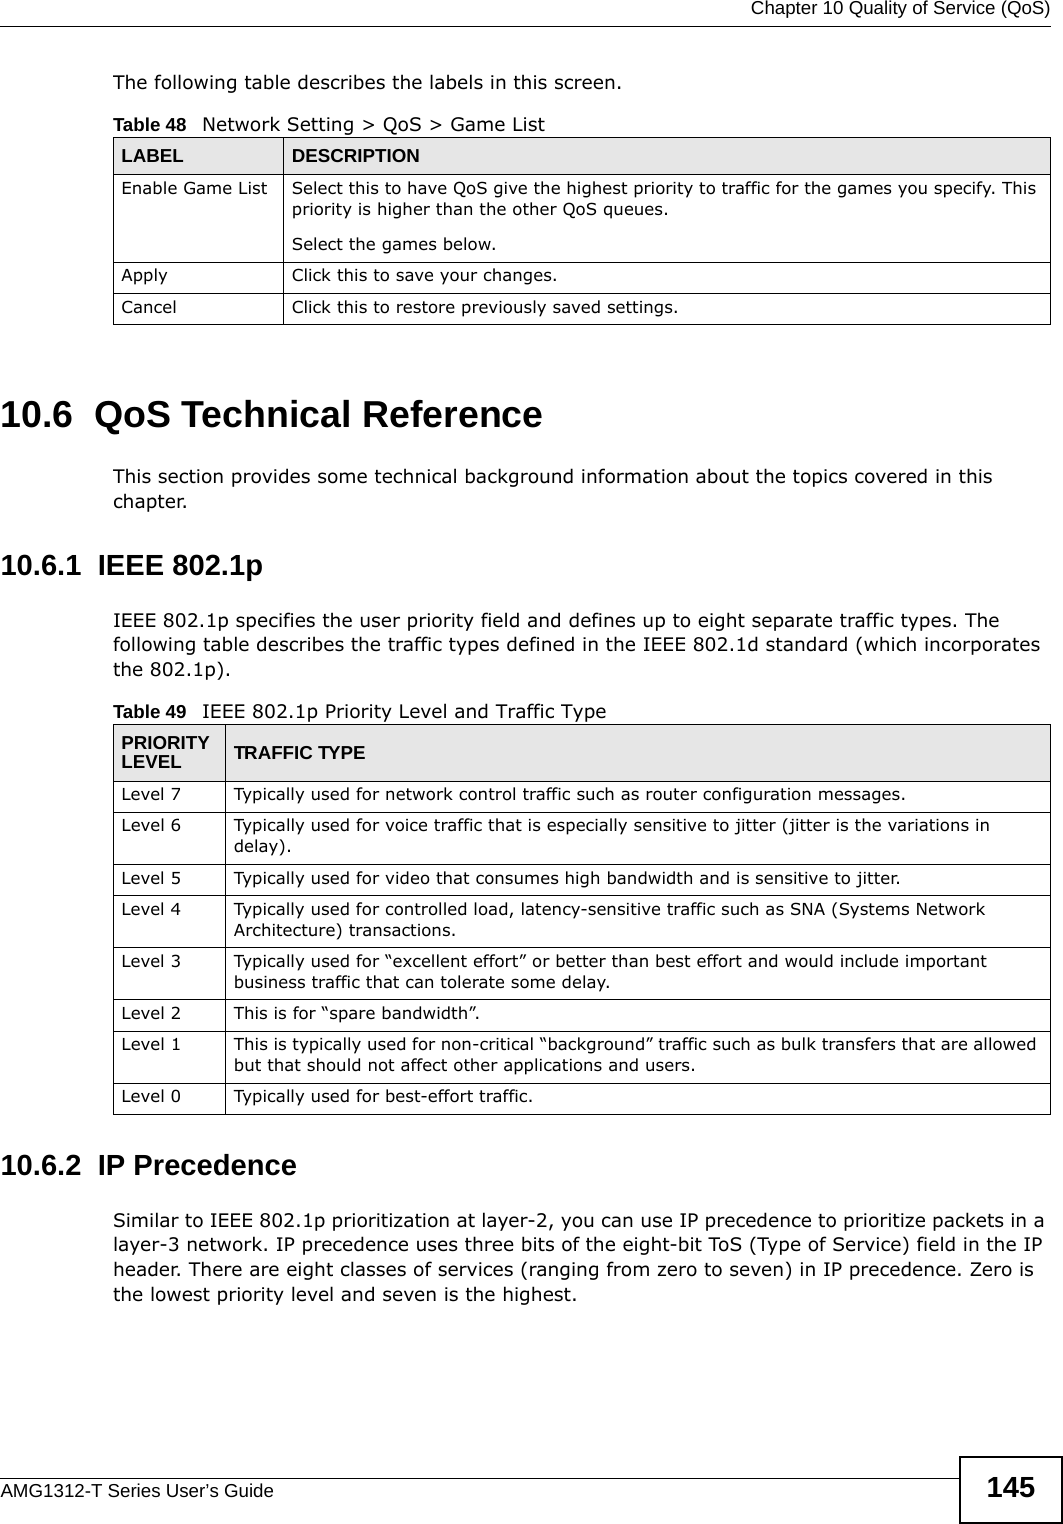  Chapter 10 Quality of Service (QoS)AMG1312-T Series User’s Guide 145The following table describes the labels in this screen. 10.6  QoS Technical ReferenceThis section provides some technical background information about the topics covered in this chapter.10.6.1  IEEE 802.1pIEEE 802.1p specifies the user priority field and defines up to eight separate traffic types. The following table describes the traffic types defined in the IEEE 802.1d standard (which incorporates the 802.1p). 10.6.2  IP PrecedenceSimilar to IEEE 802.1p prioritization at layer-2, you can use IP precedence to prioritize packets in a layer-3 network. IP precedence uses three bits of the eight-bit ToS (Type of Service) field in the IP header. There are eight classes of services (ranging from zero to seven) in IP precedence. Zero is the lowest priority level and seven is the highest.Table 48   Network Setting &gt; QoS &gt; Game ListLABEL DESCRIPTIONEnable Game List Select this to have QoS give the highest priority to traffic for the games you specify. This priority is higher than the other QoS queues.Select the games below.Apply Click this to save your changes.Cancel Click this to restore previously saved settings.Table 49   IEEE 802.1p Priority Level and Traffic TypePRIORITY LEVEL TRAFFIC TYPELevel 7 Typically used for network control traffic such as router configuration messages.Level 6 Typically used for voice traffic that is especially sensitive to jitter (jitter is the variations in delay).Level 5 Typically used for video that consumes high bandwidth and is sensitive to jitter.Level 4 Typically used for controlled load, latency-sensitive traffic such as SNA (Systems Network Architecture) transactions.Level 3 Typically used for “excellent effort” or better than best effort and would include important business traffic that can tolerate some delay.Level 2 This is for “spare bandwidth”. Level 1 This is typically used for non-critical “background” traffic such as bulk transfers that are allowed but that should not affect other applications and users. Level 0 Typically used for best-effort traffic.